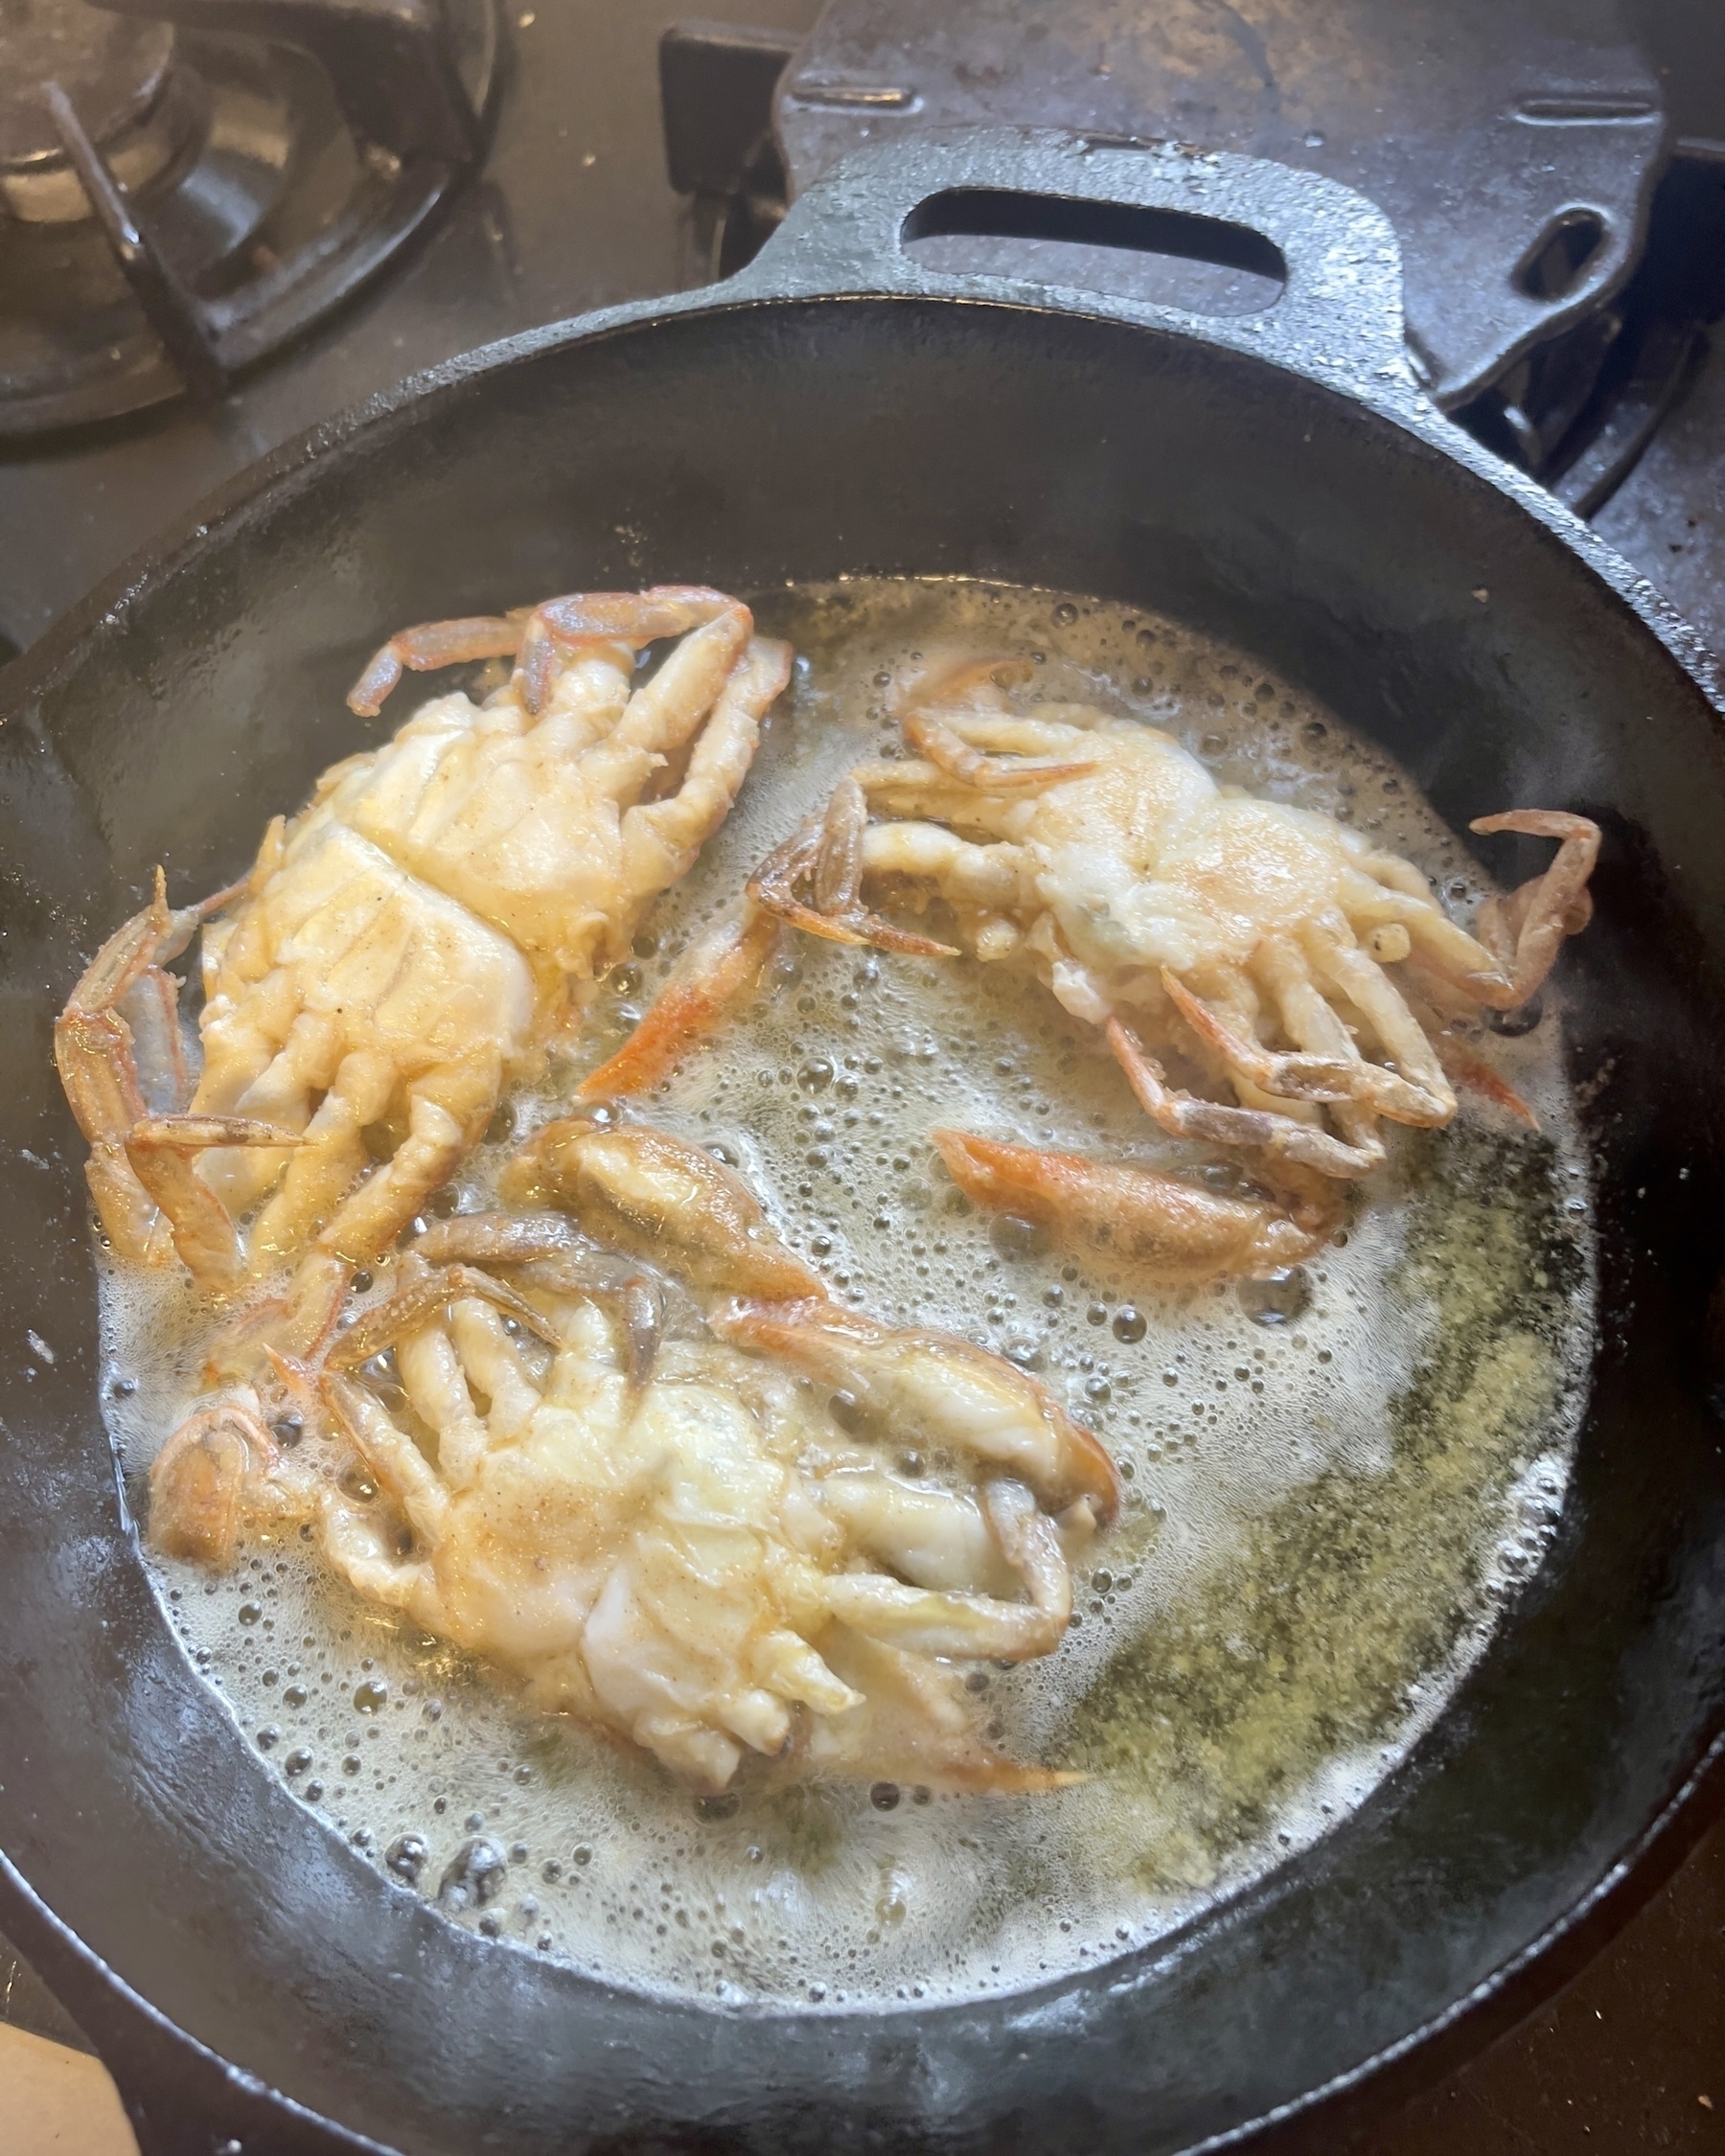 Soft shell crabs in the frying pan.